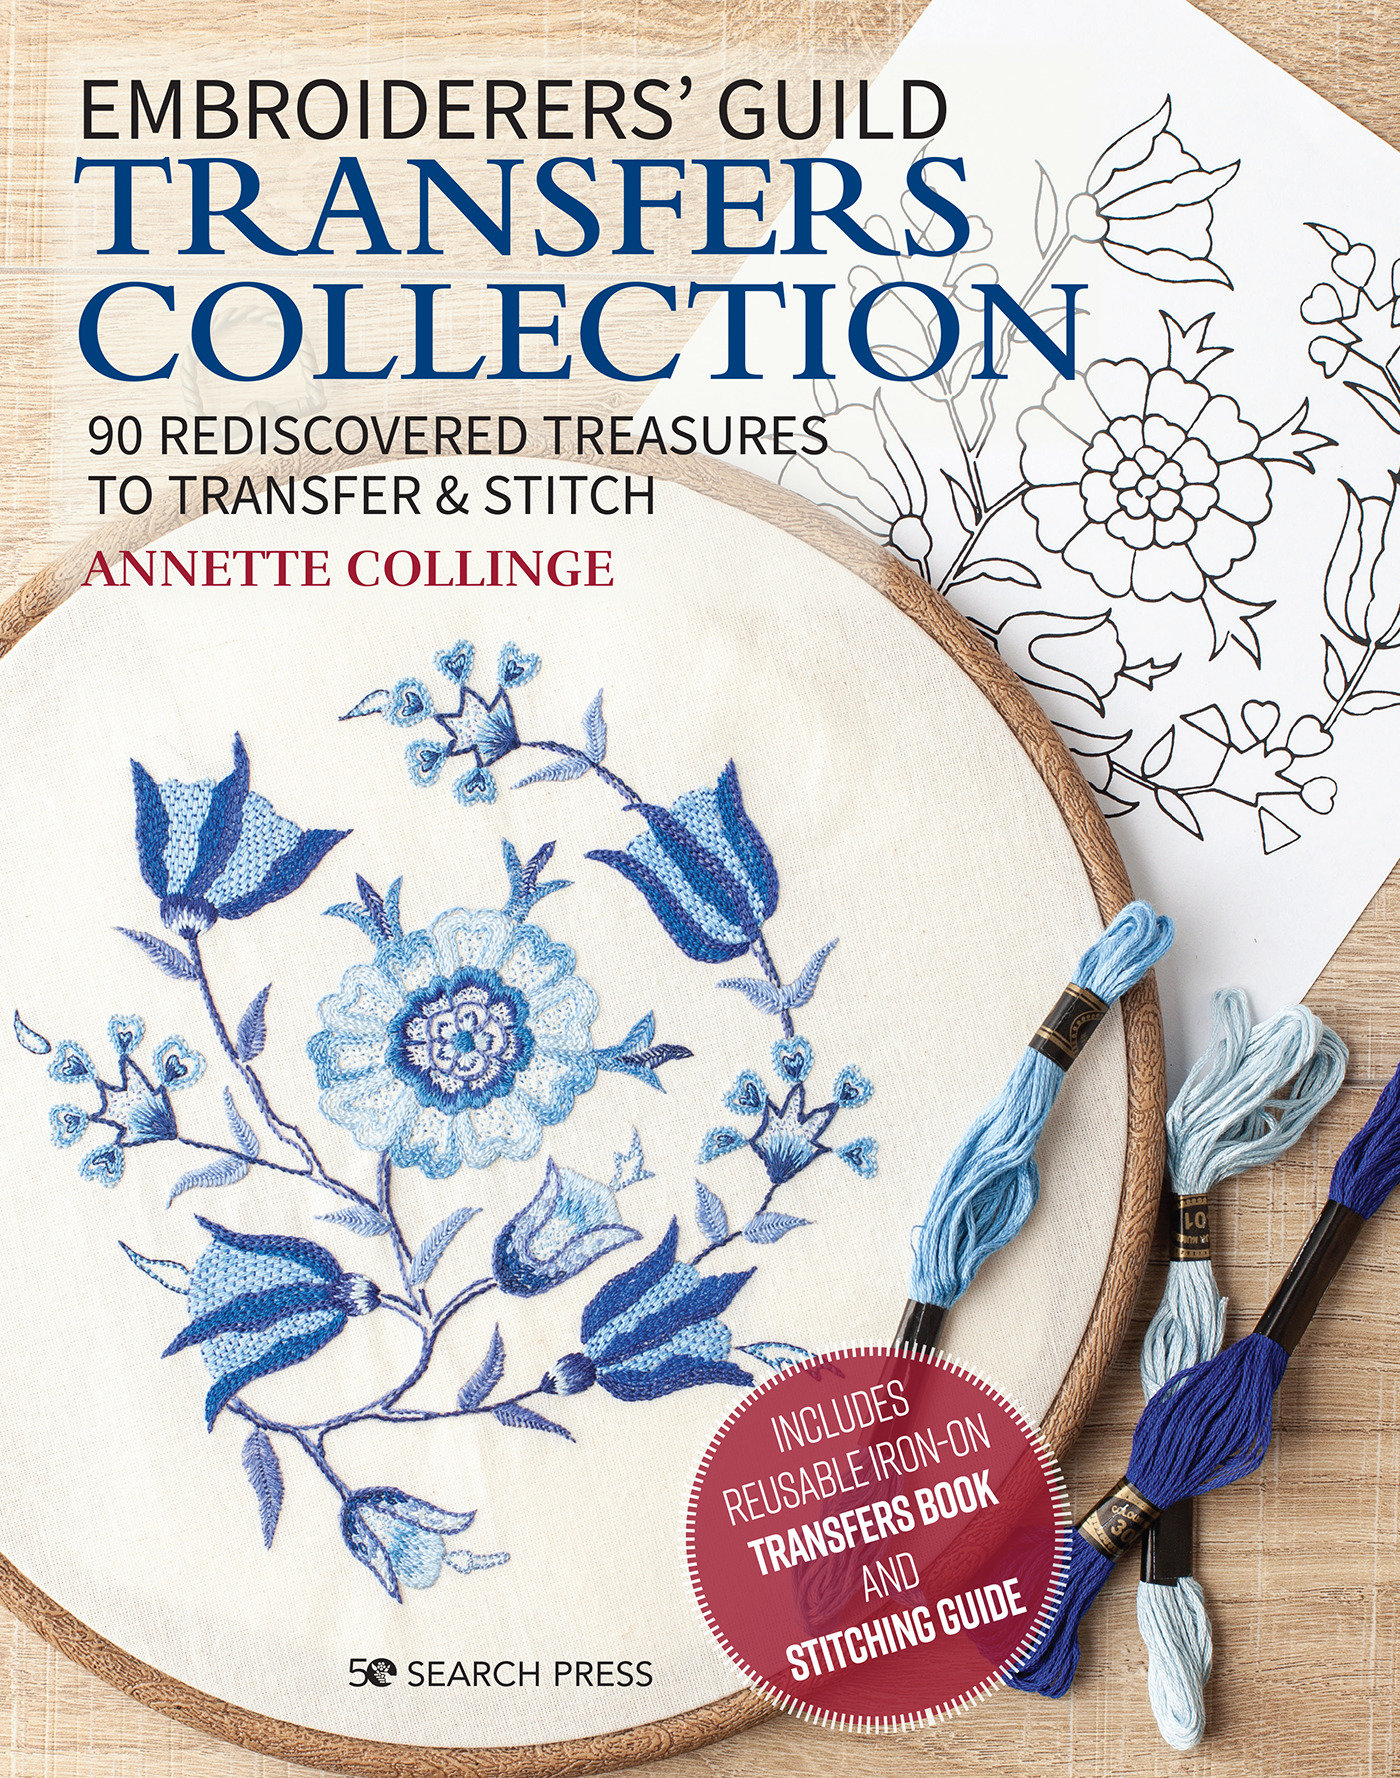 Embroiderers' Guild Transfers Collection (Hardcover Book)